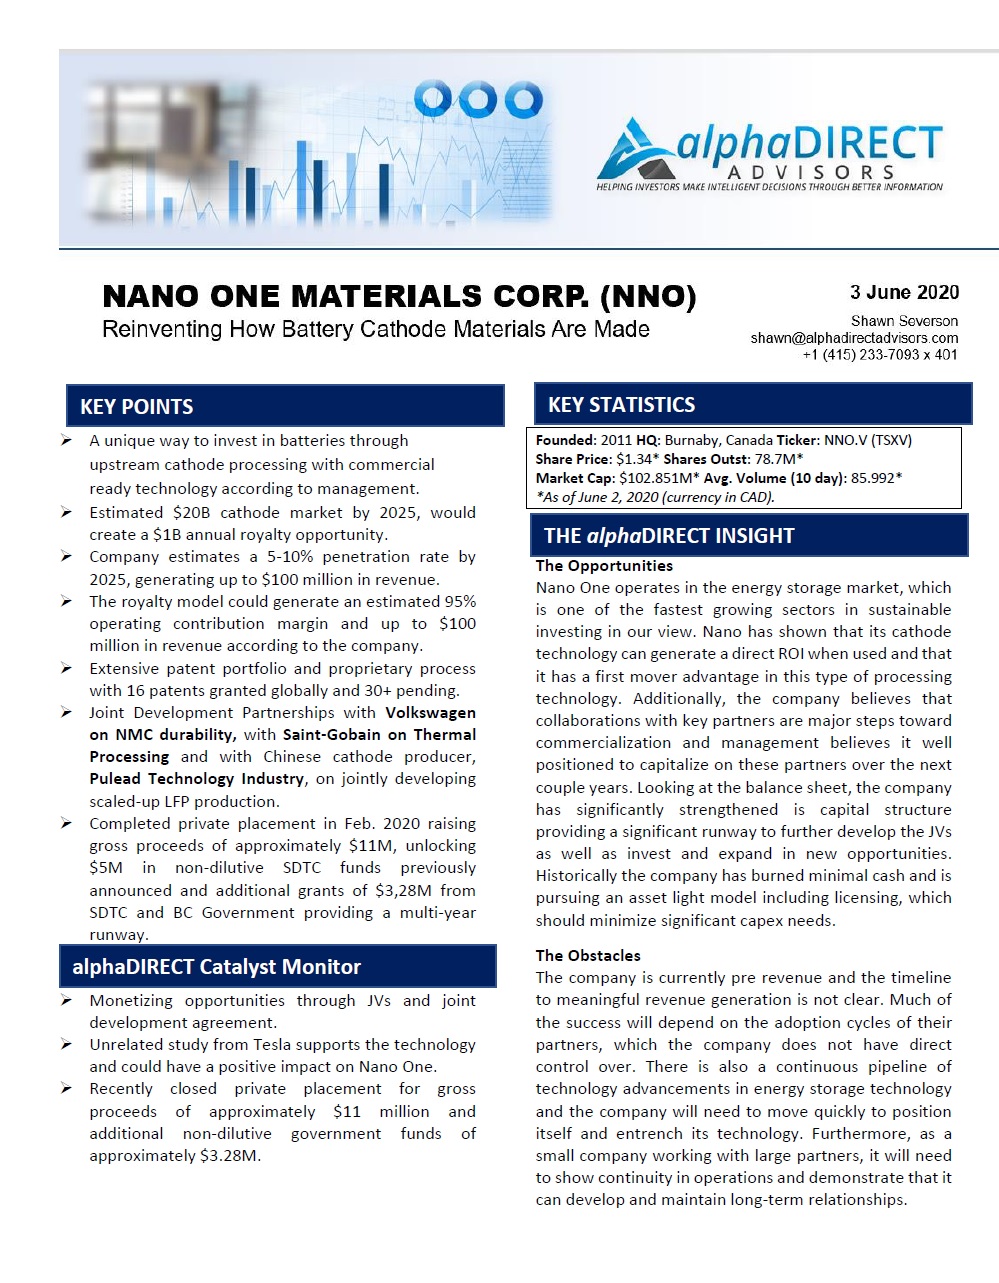 alphaDIRECT Advisors Reviews Nano One Materials’ Strategic Drivers in Overview Report 

